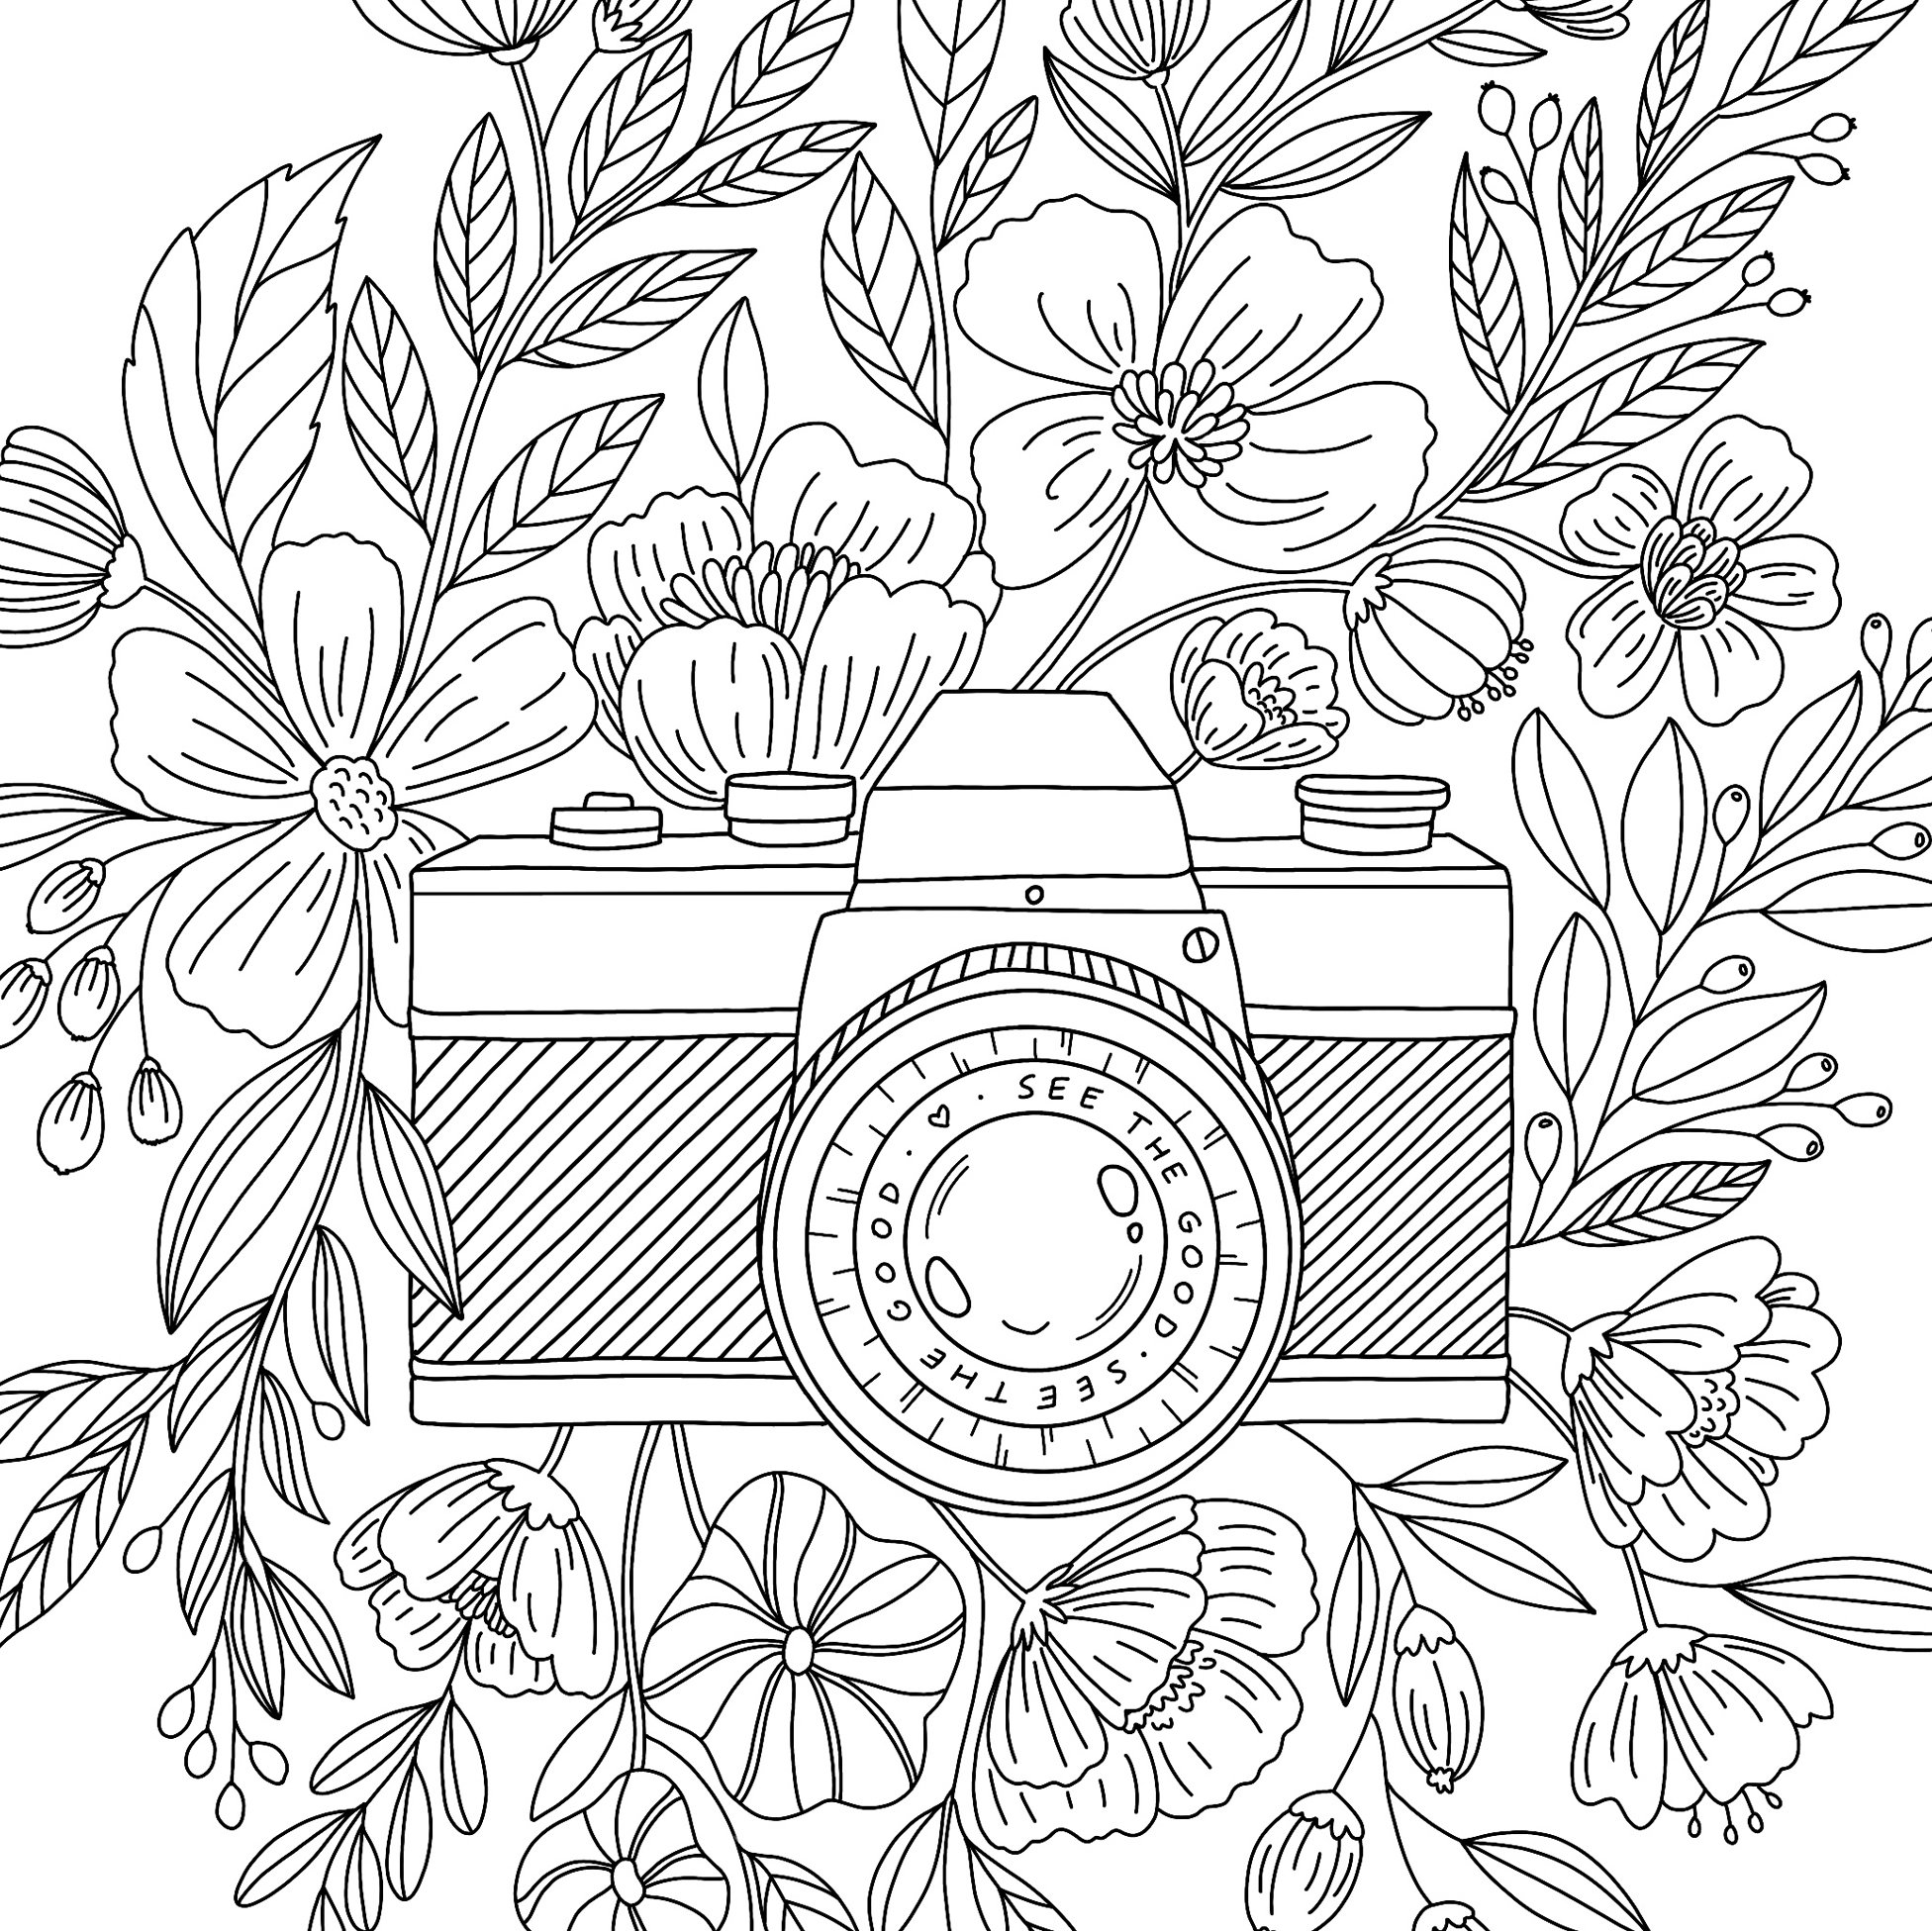 6000 coloring pages for kids